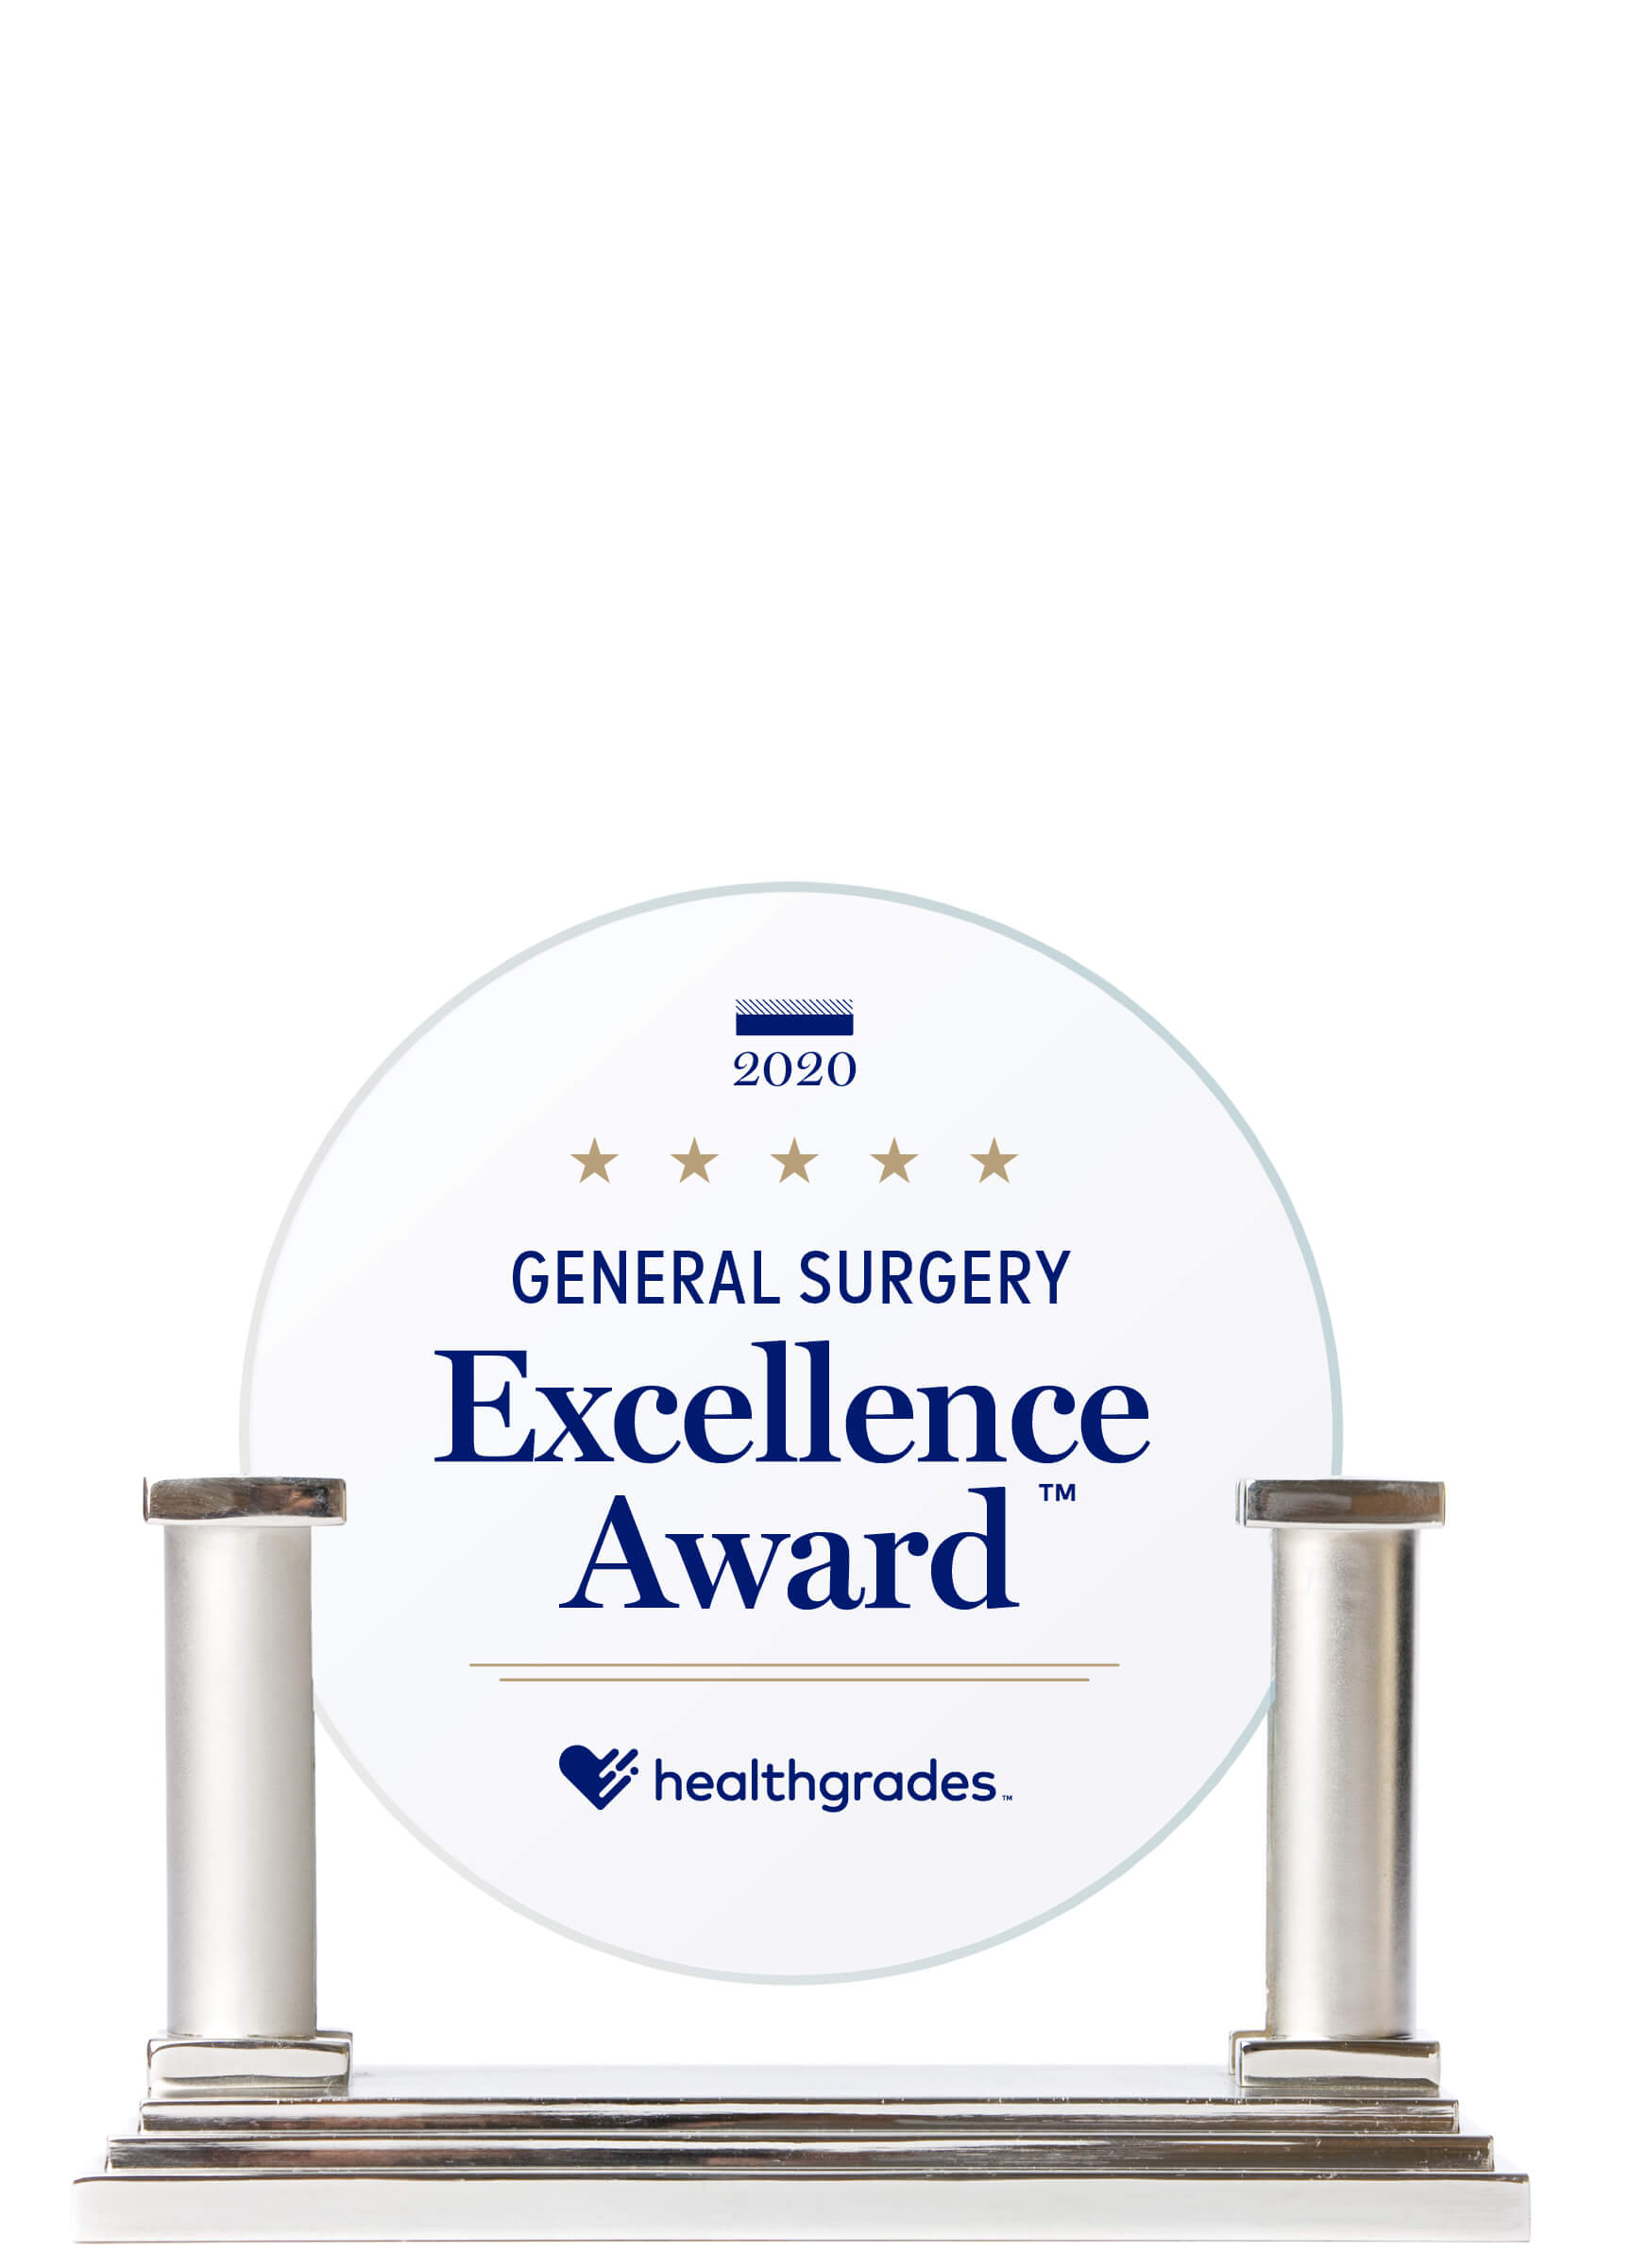 Healthgrades Excellence Award for General Surgery Trophy 2020